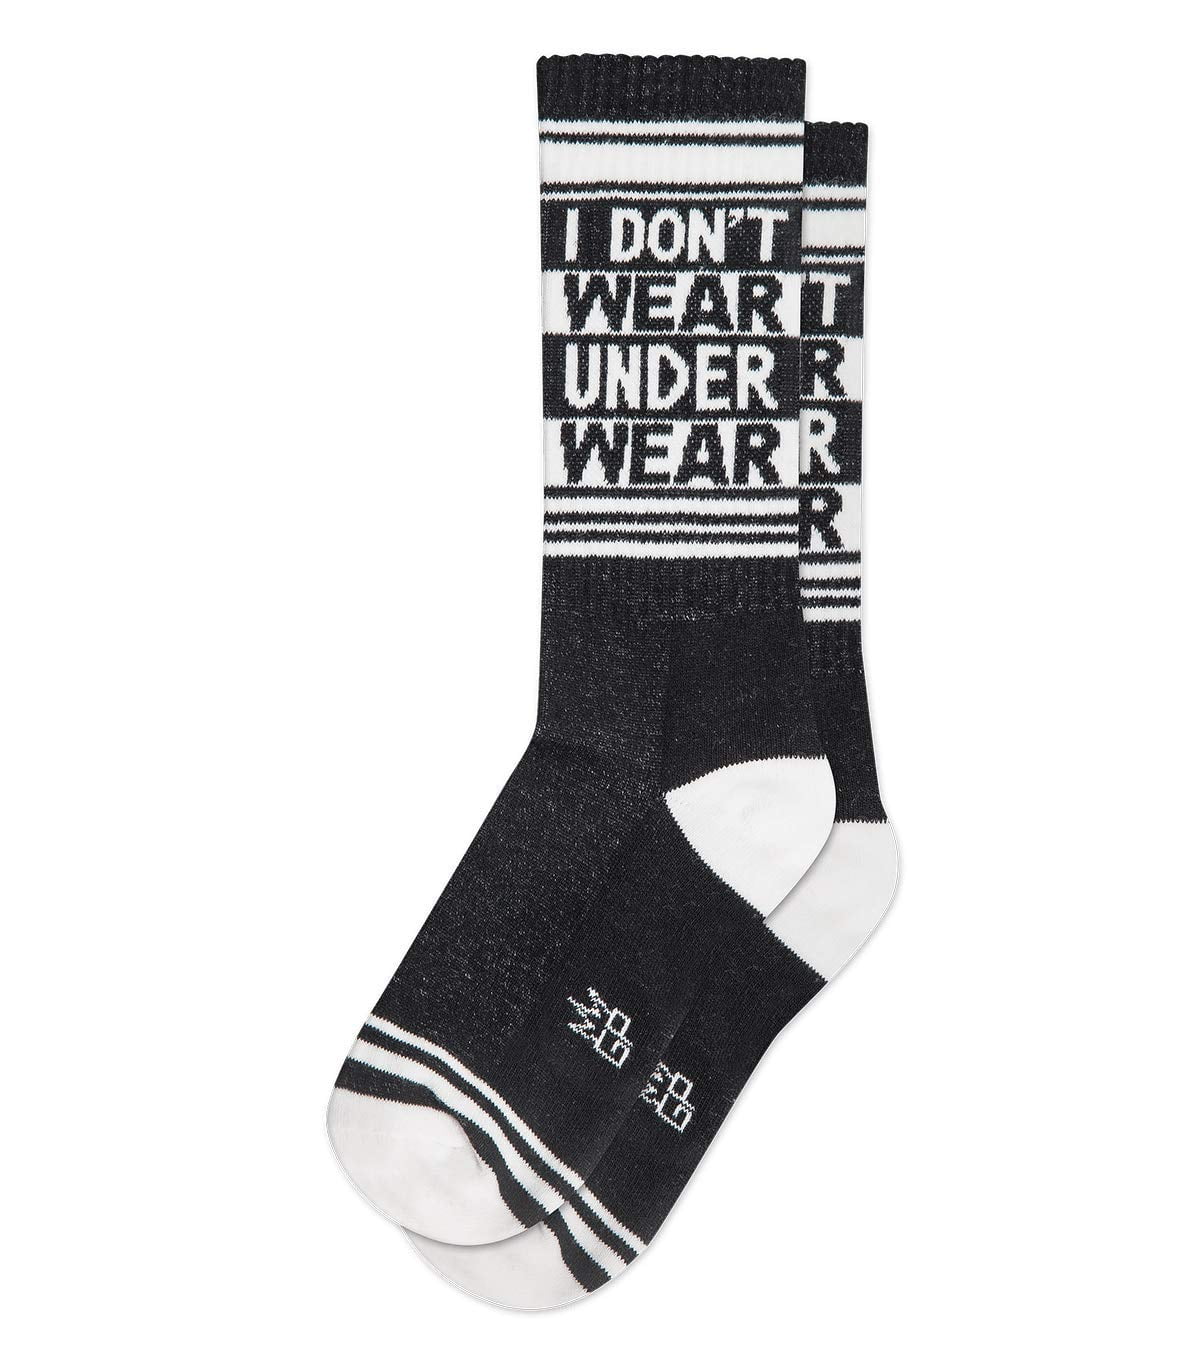 I DON'T WEAR UNDERWEAR Socks by Gumball Poodle, Ribbed Gym Socks Unisex ...